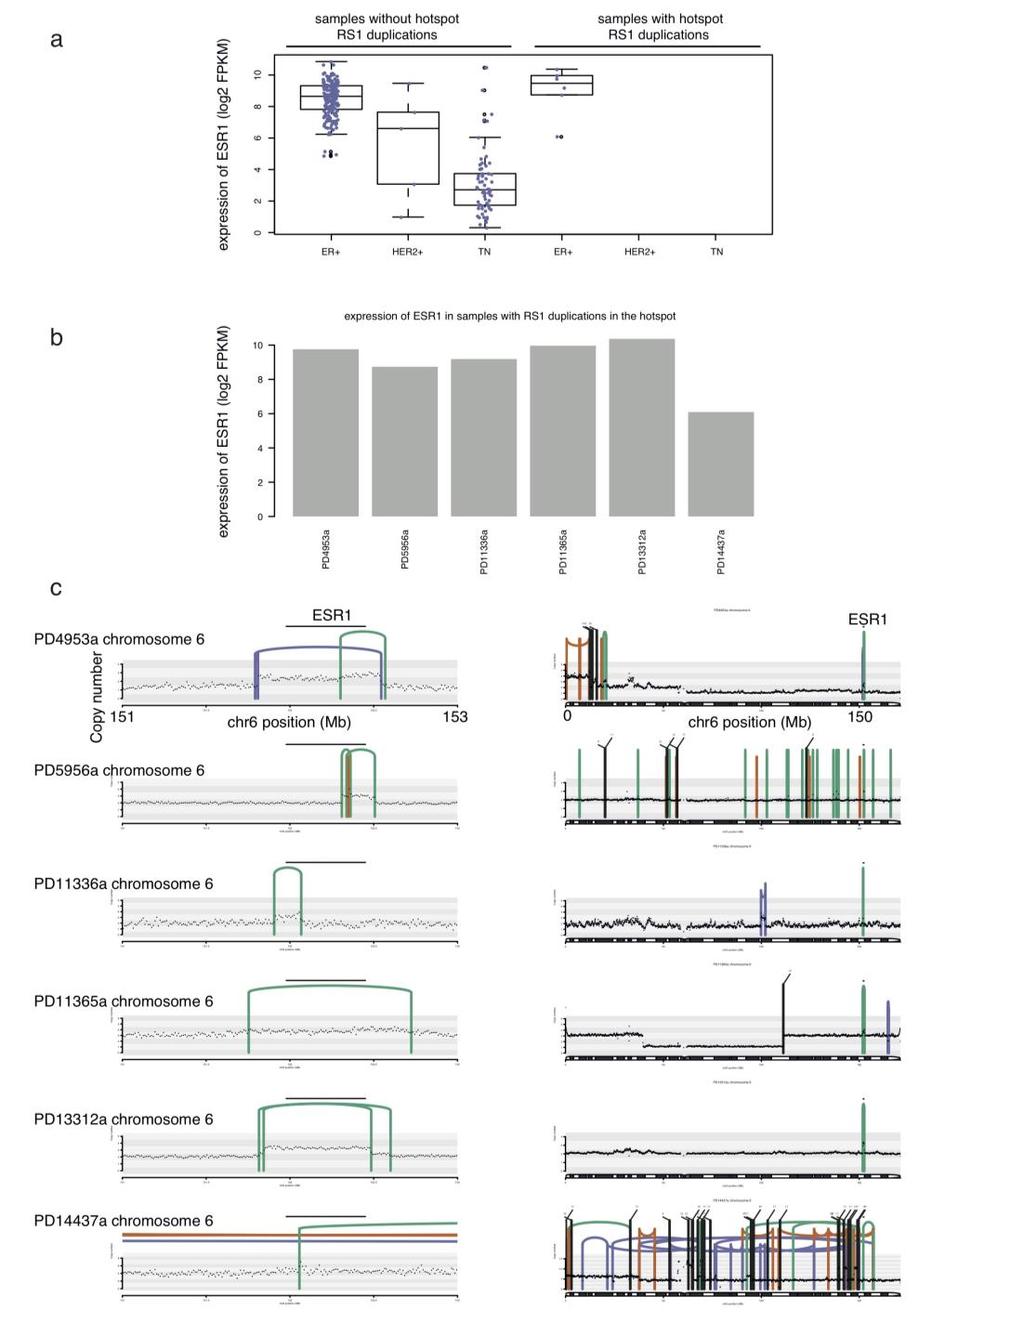 Supplementary Figure 7 Tandem duplications wholly or partially increase the number of copies of ESR1, which correlates with high expression of the gene.